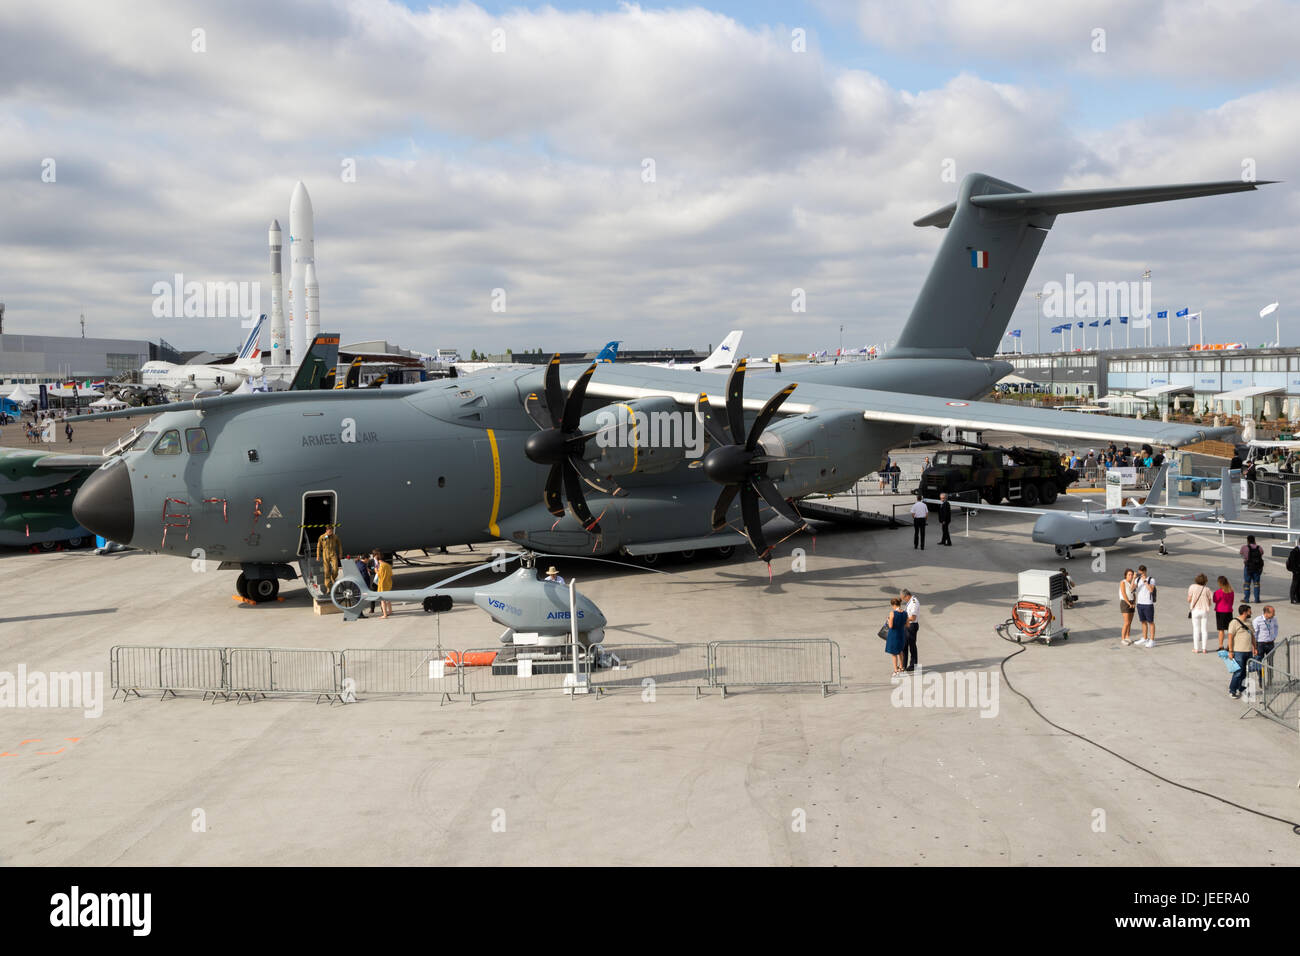 PARIS, FRANCE - JUN 23, 2017: French Air Force Airbus A400M military transport plane on display at the Paris Air Show 2017. Stock Photo